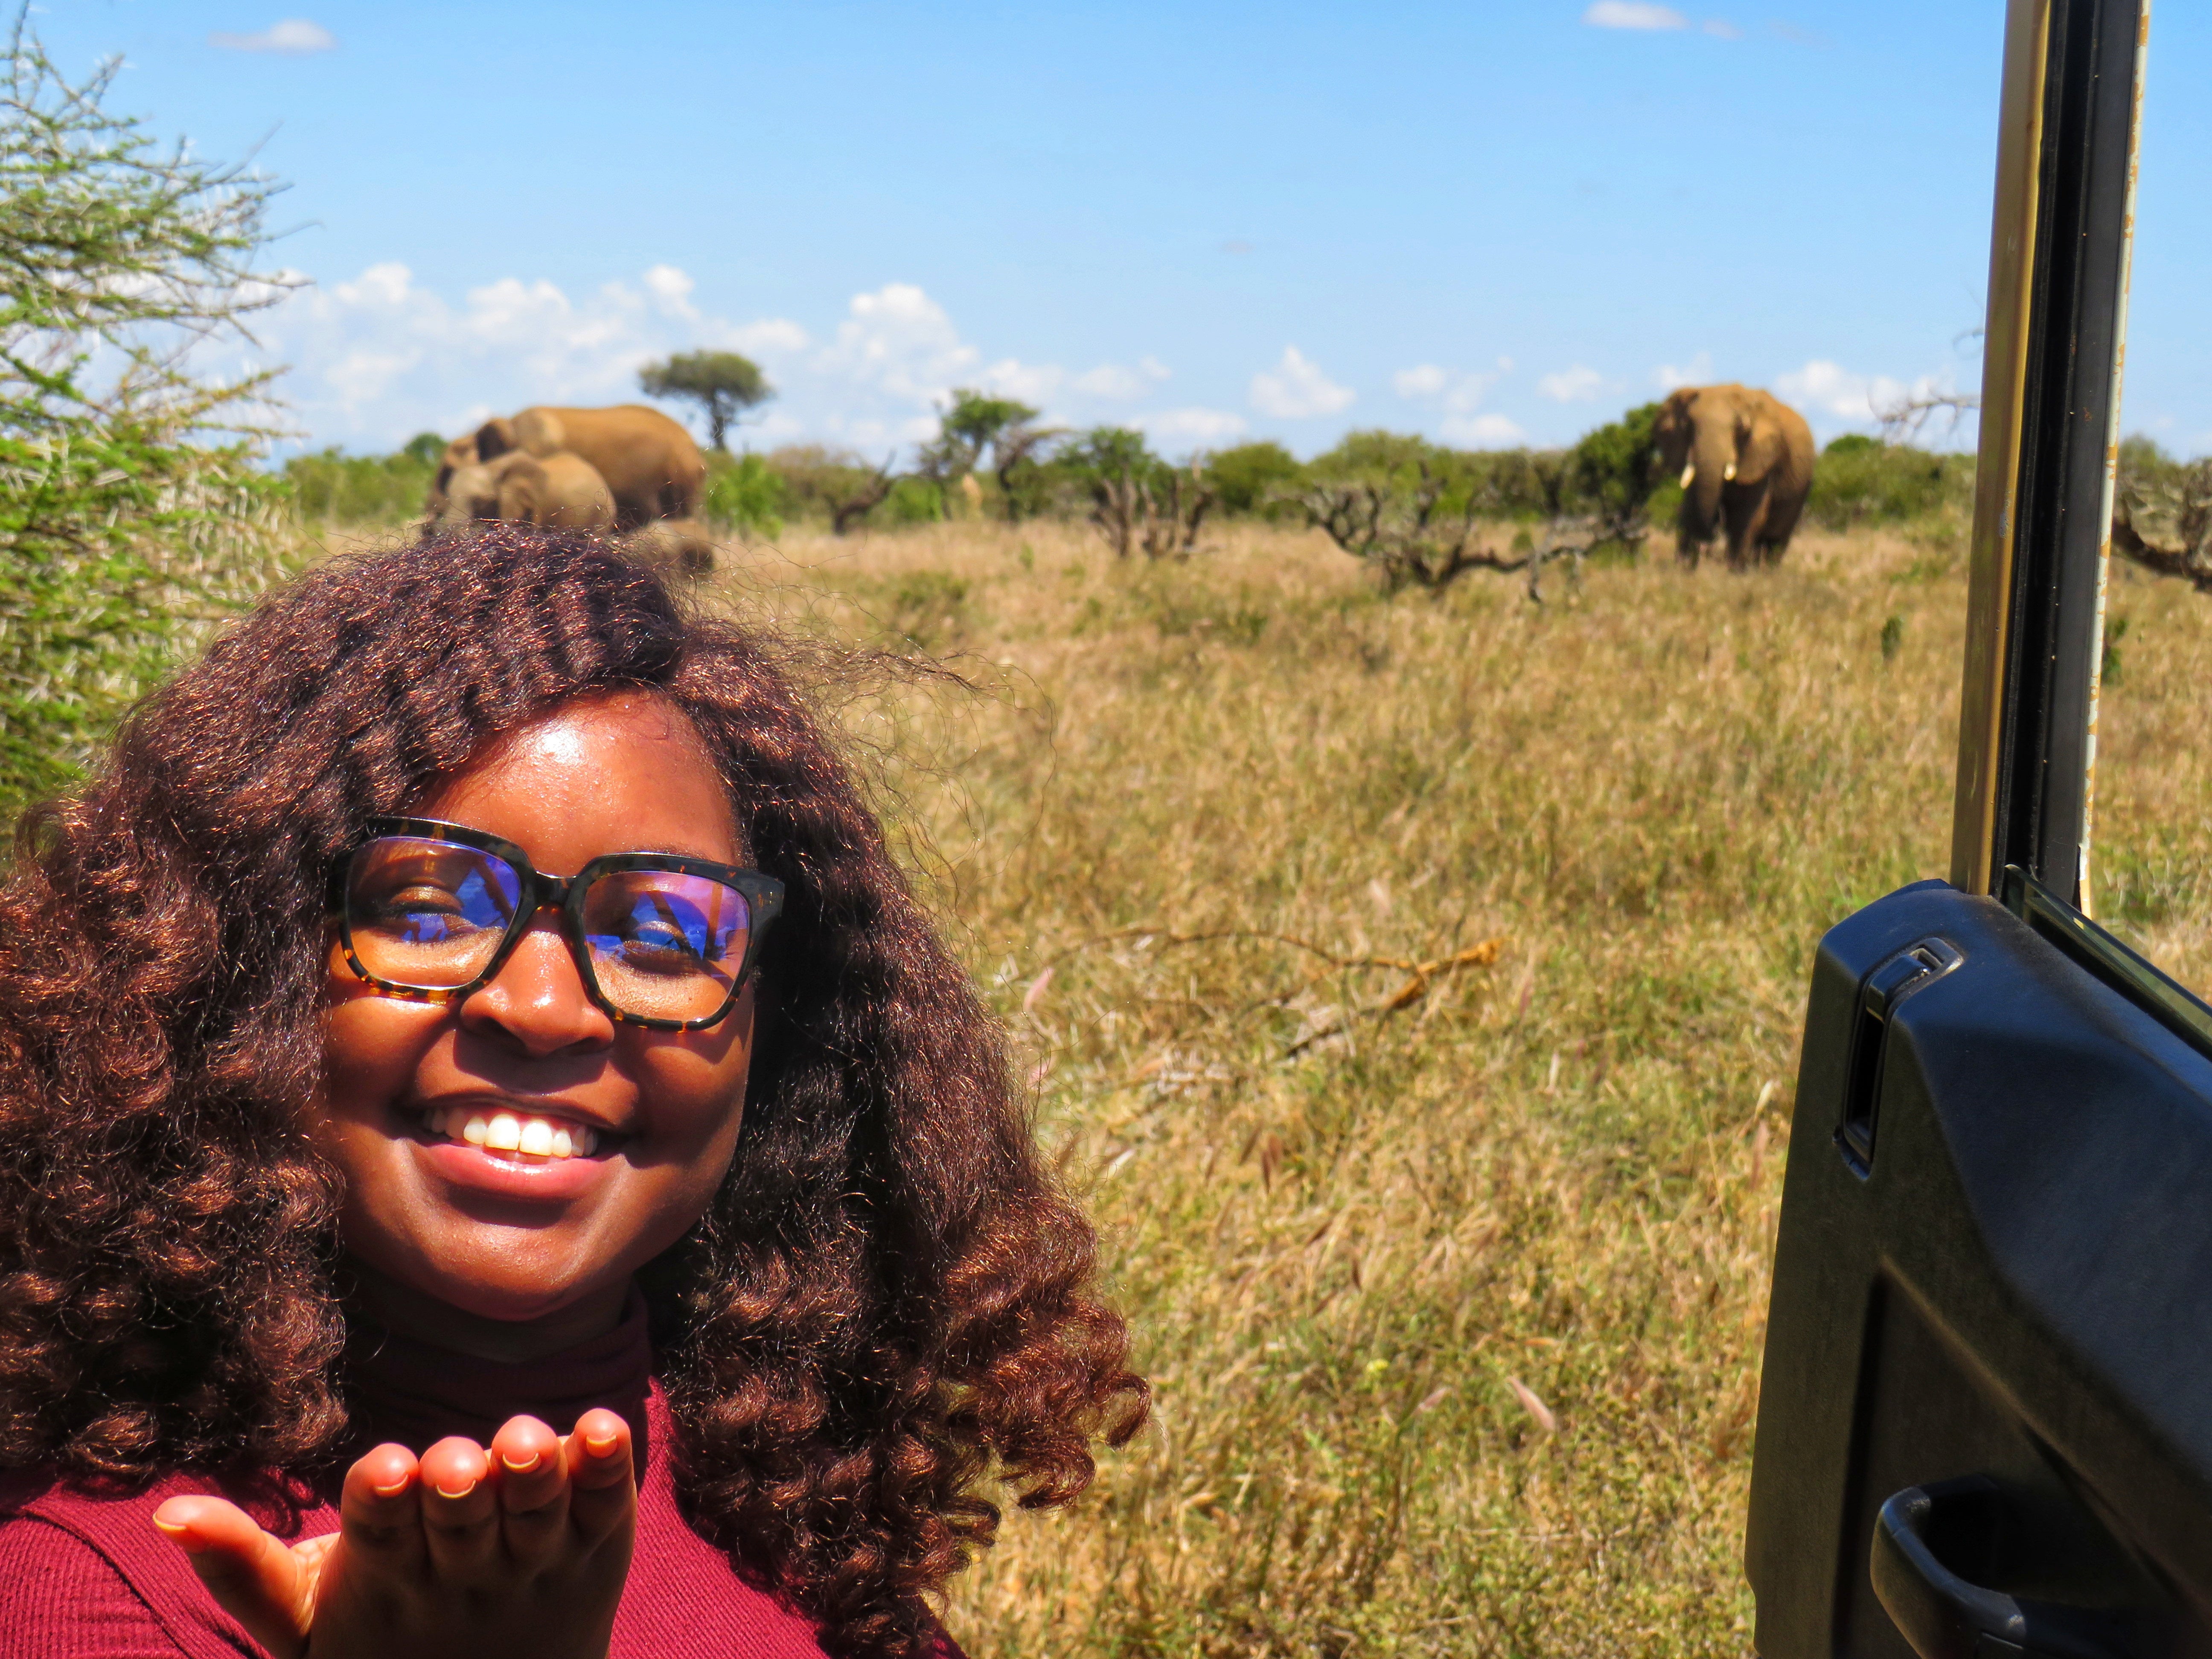 Idah Murithi meets some of the elephants she is determined to protect